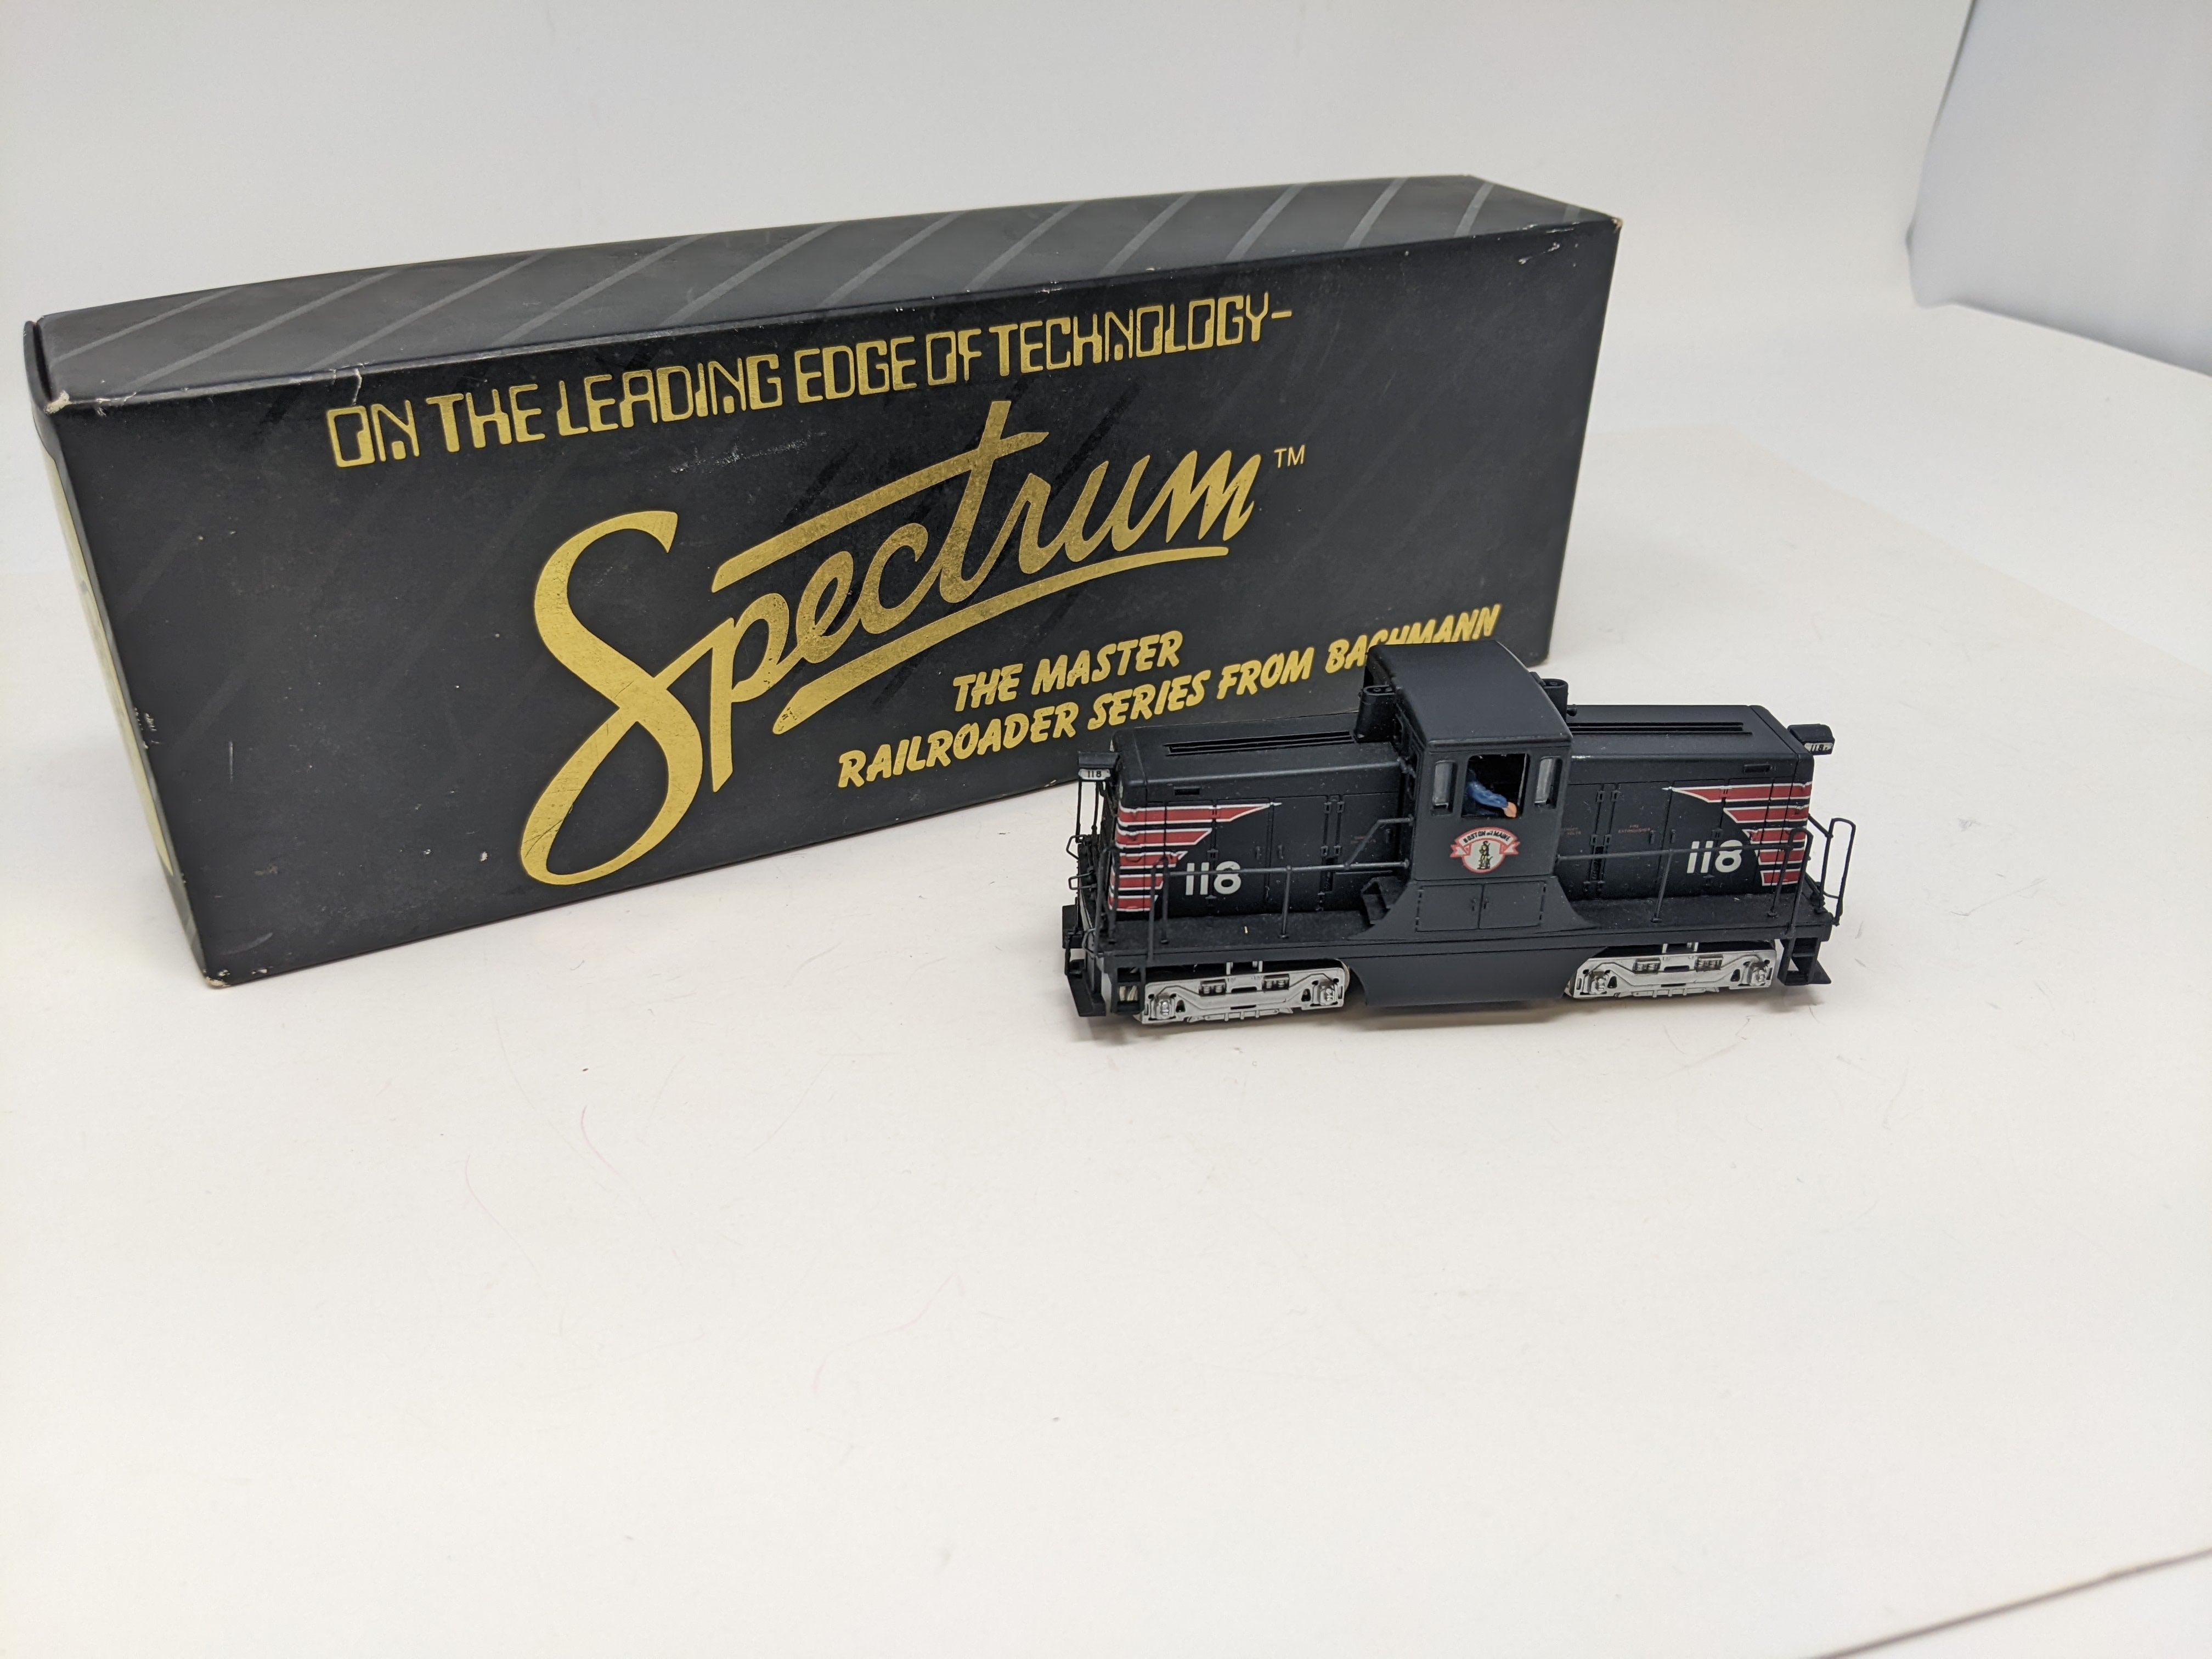 USED Bachmann 80022 HO Scale, Spectrum GE 44 Ton Diesel Switcher, Boston and Maine #118, Minuteman (DC)